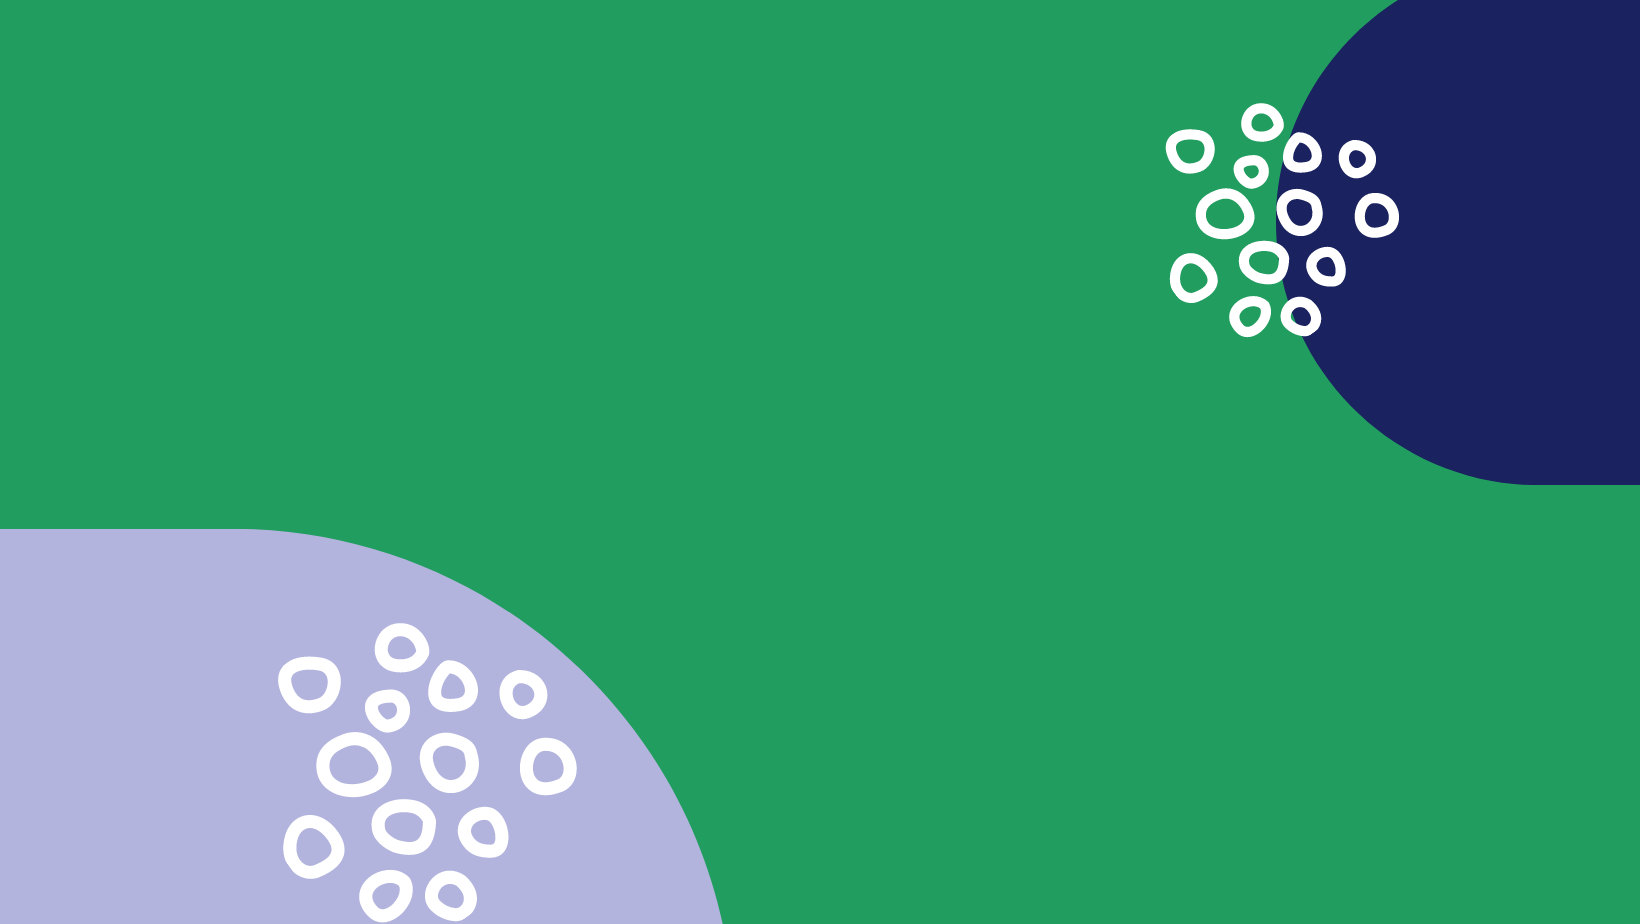 green background with blue and purple cicles and small groups of white circles